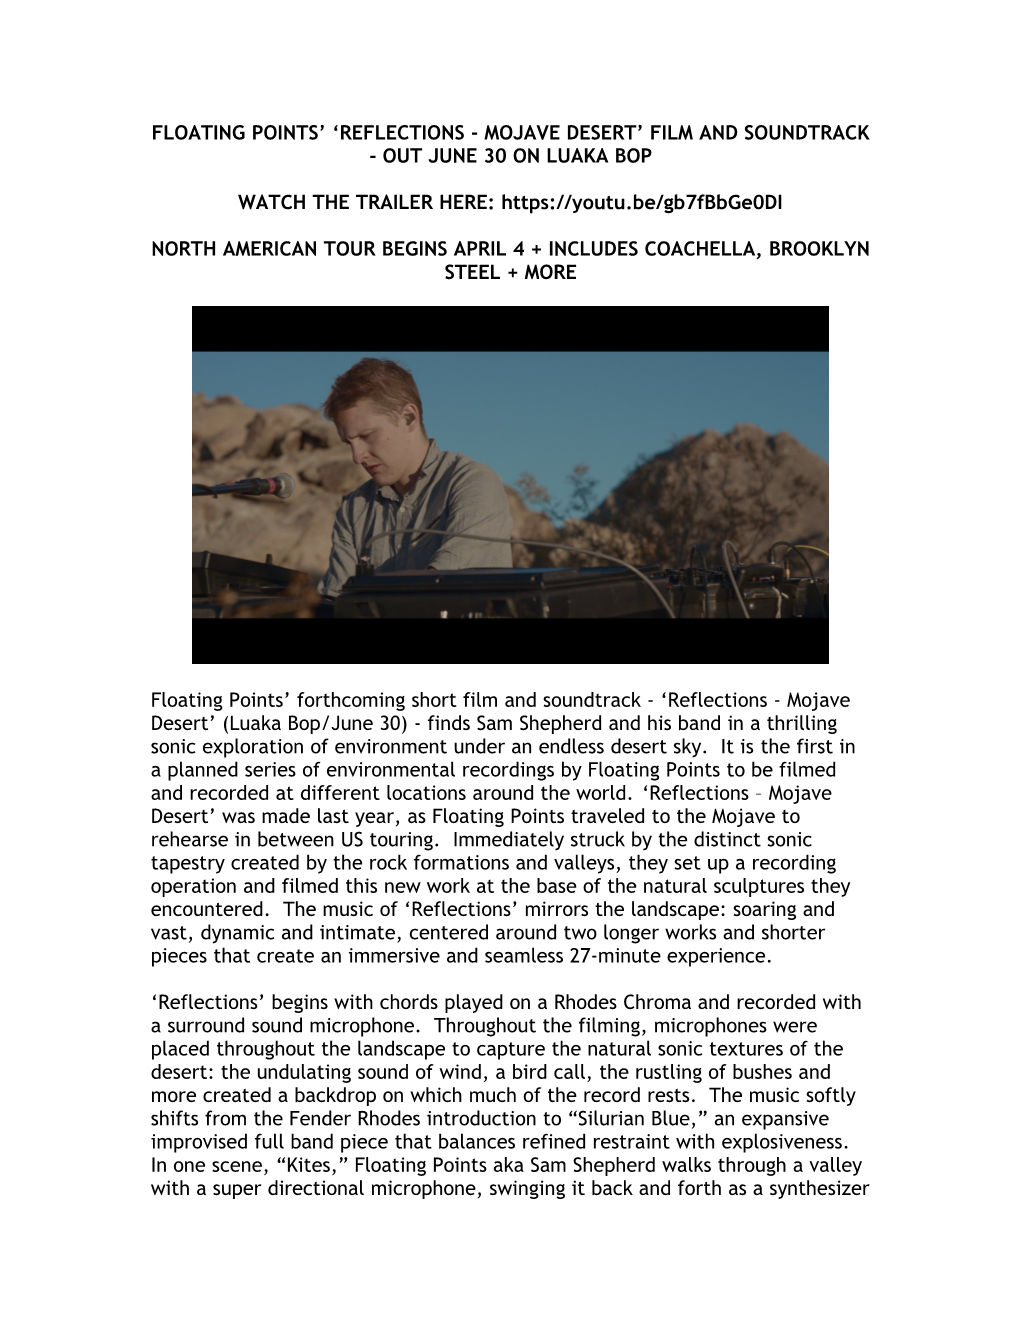 Floating Points Reflections - Mojave Desert Film and Soundtrack - Outjune 30 on Luaka Bop